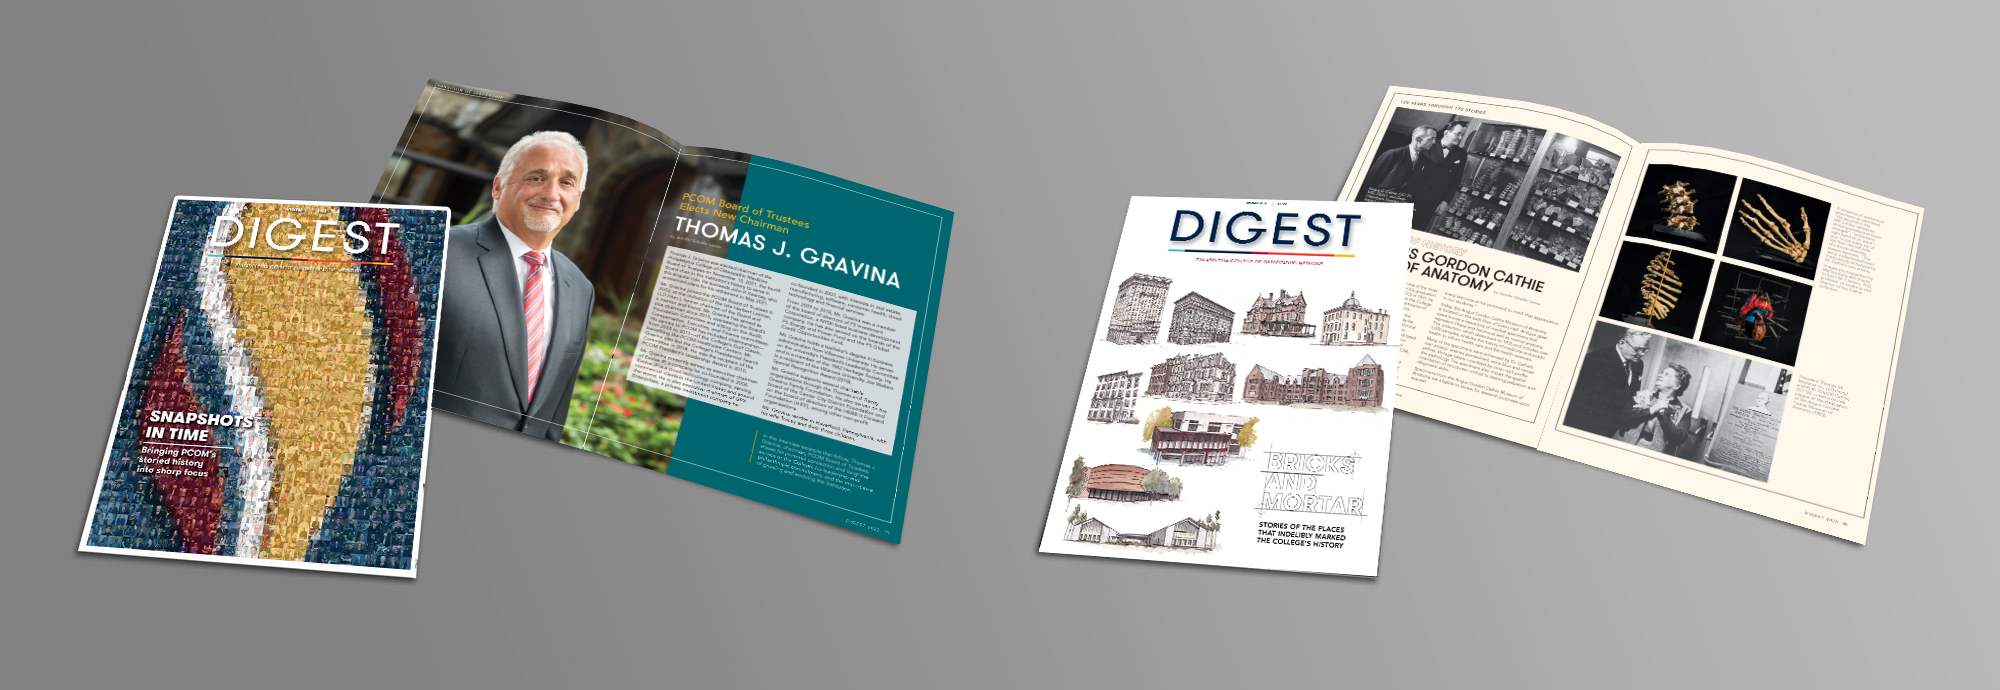 Example of PCOM Digest print magazine covers and layouts